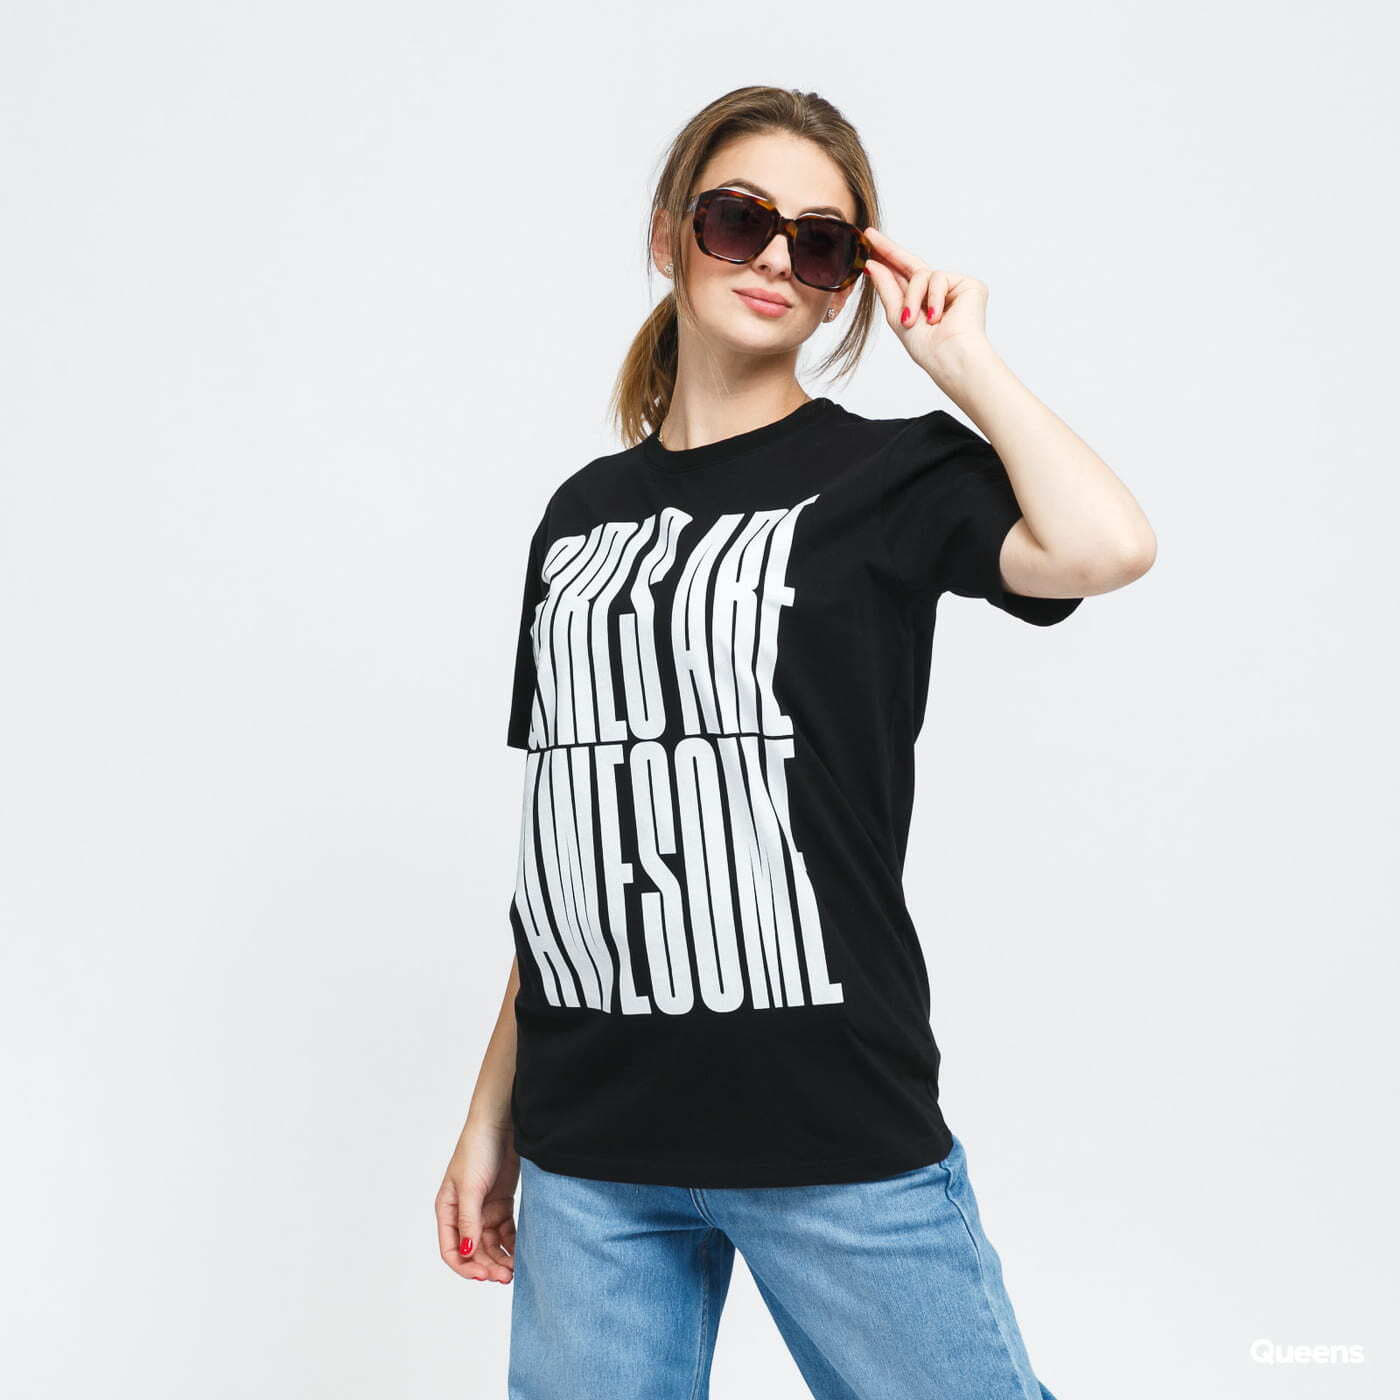 T-shirts Girls Are Awesome Stand Tall Tee černé